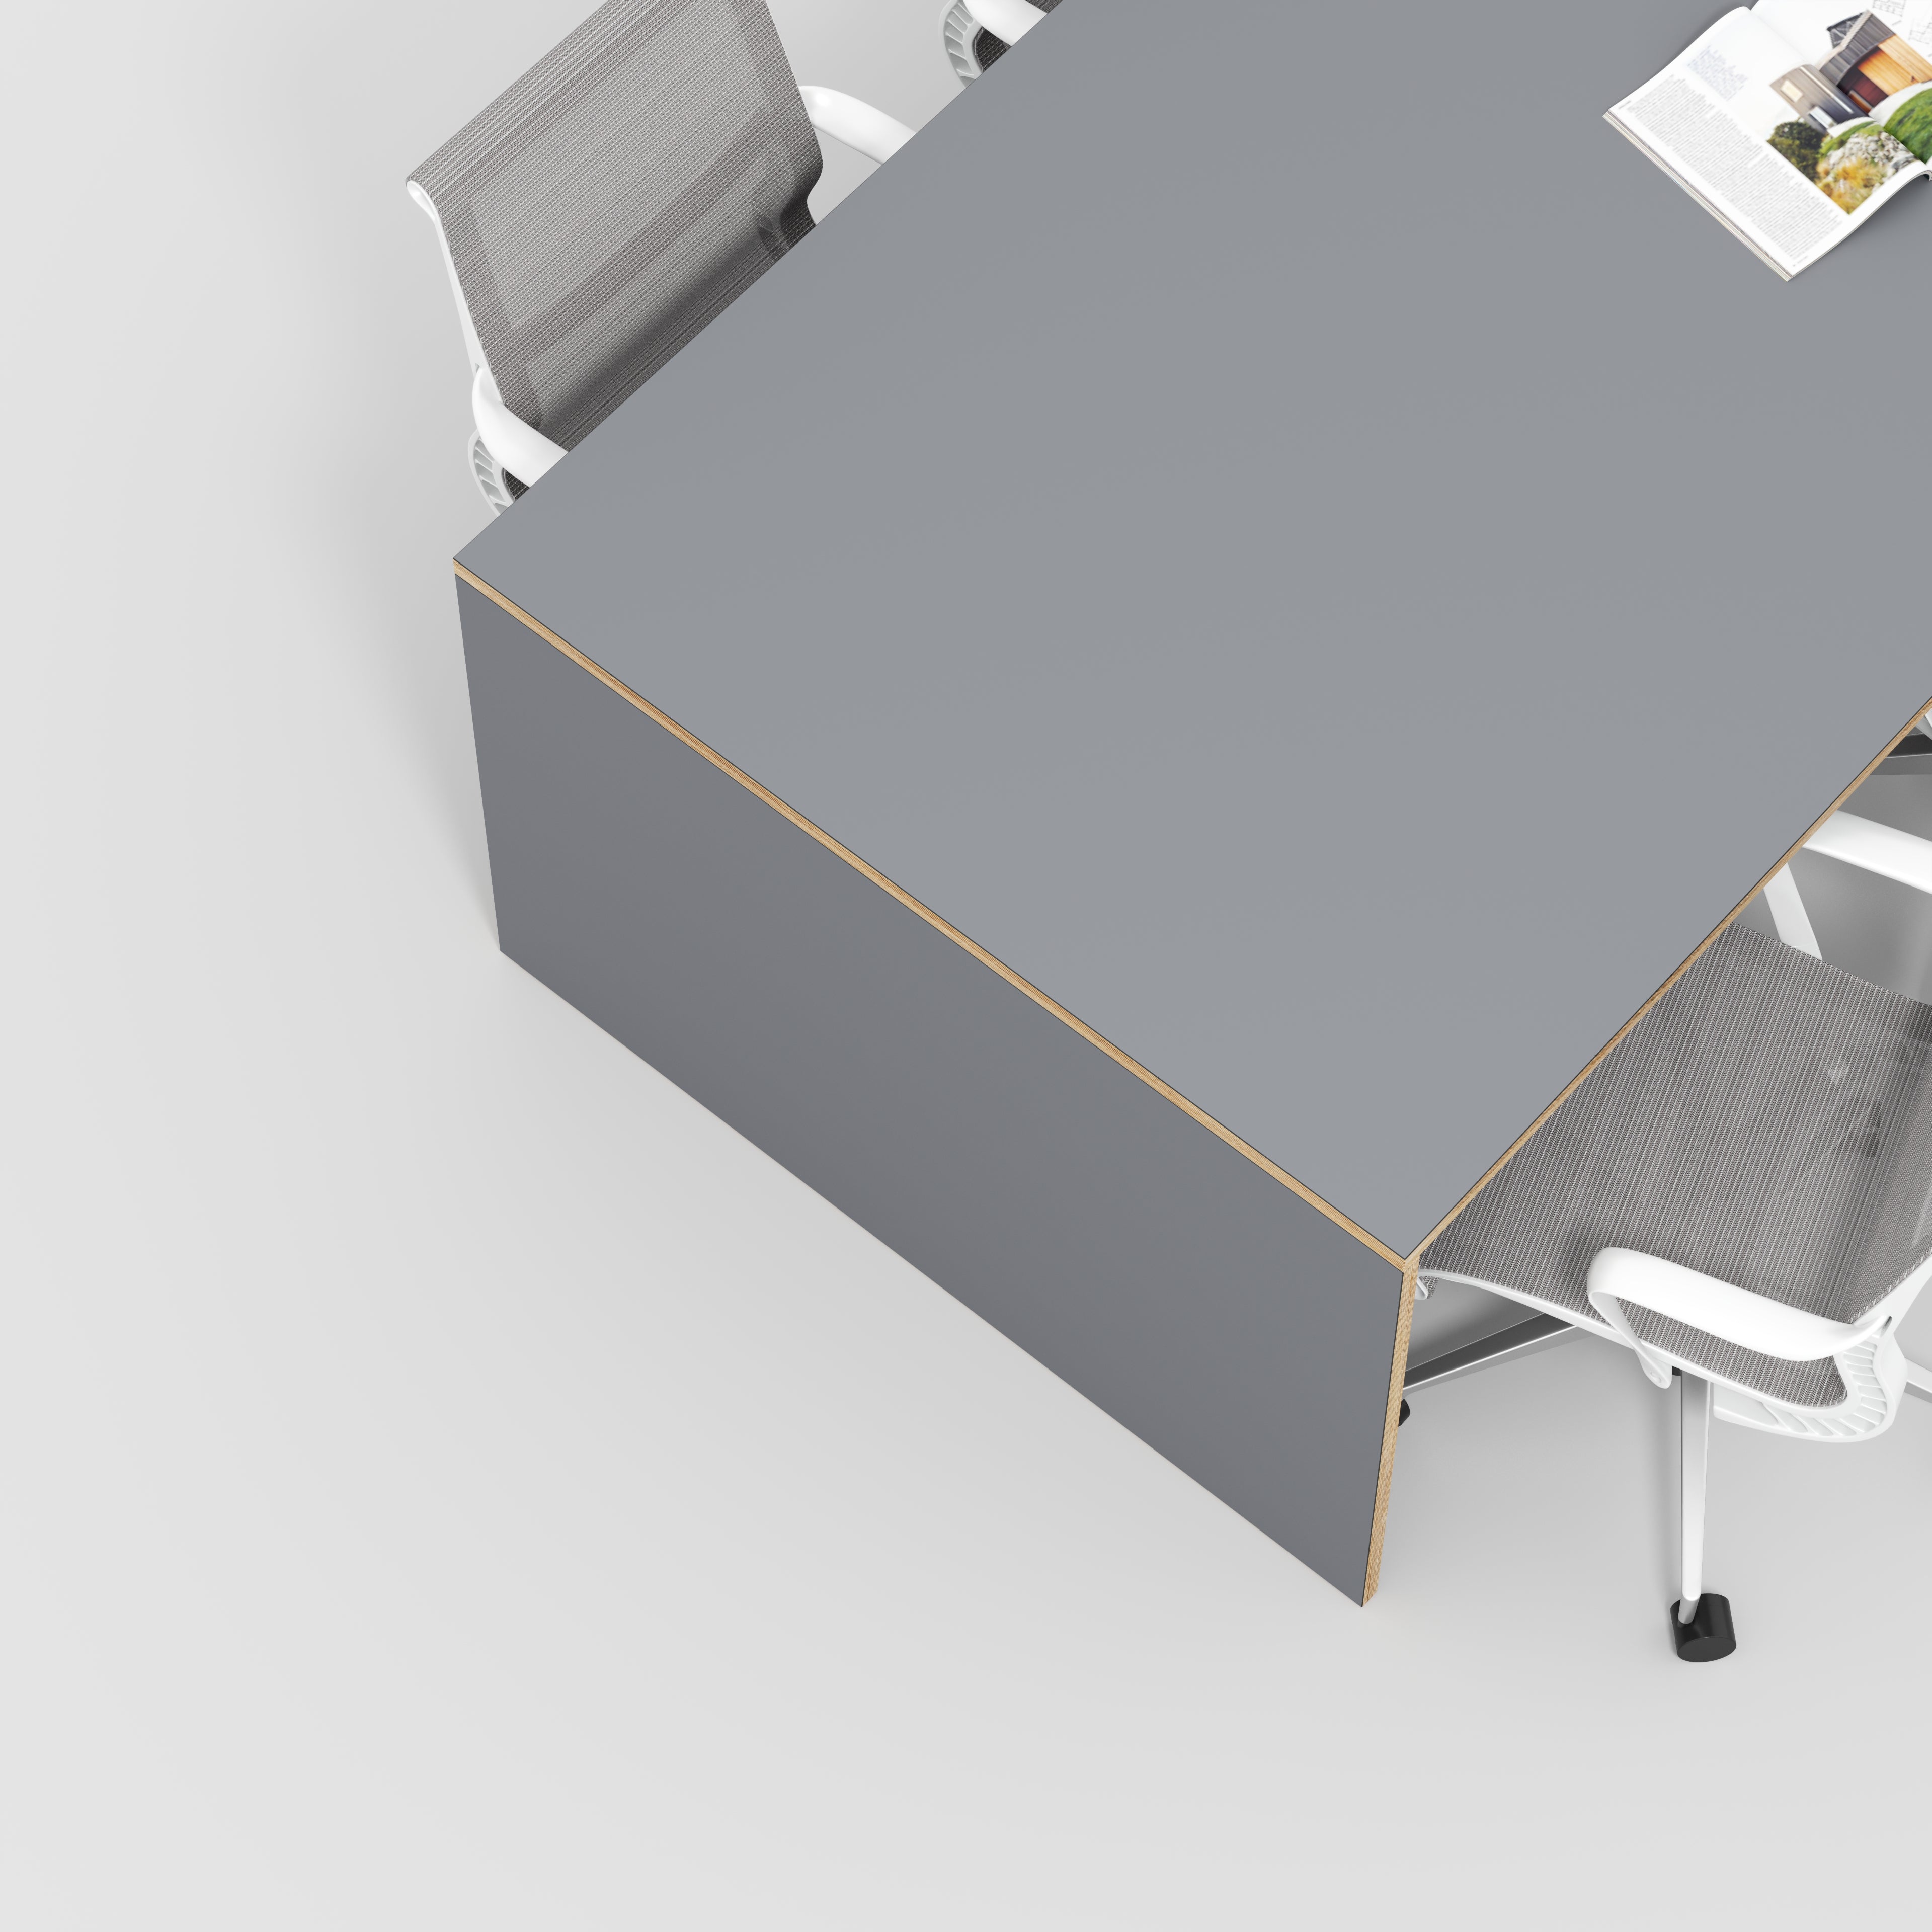 Table with Solid Sides - Formica Tornado Grey - 4000(w) x 1000(d) x 750(h)